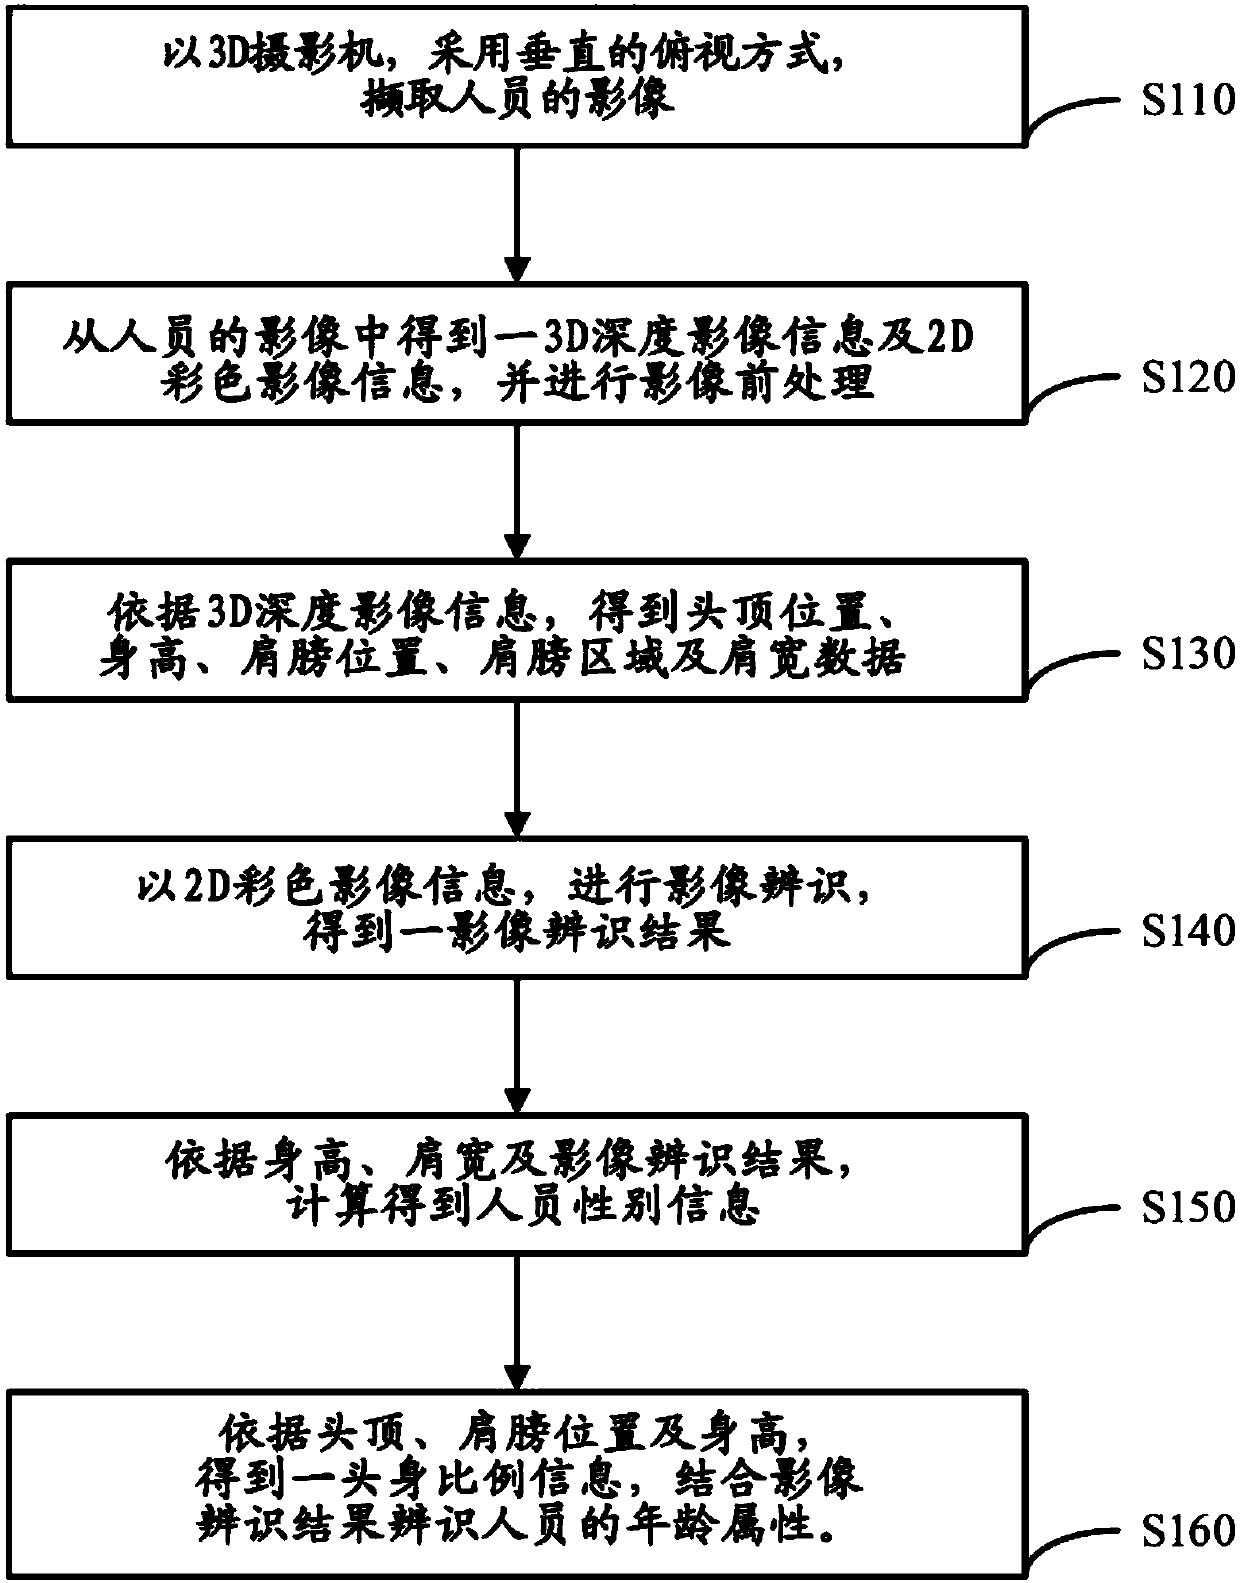 Gender and age identification method for vertical image flow counting